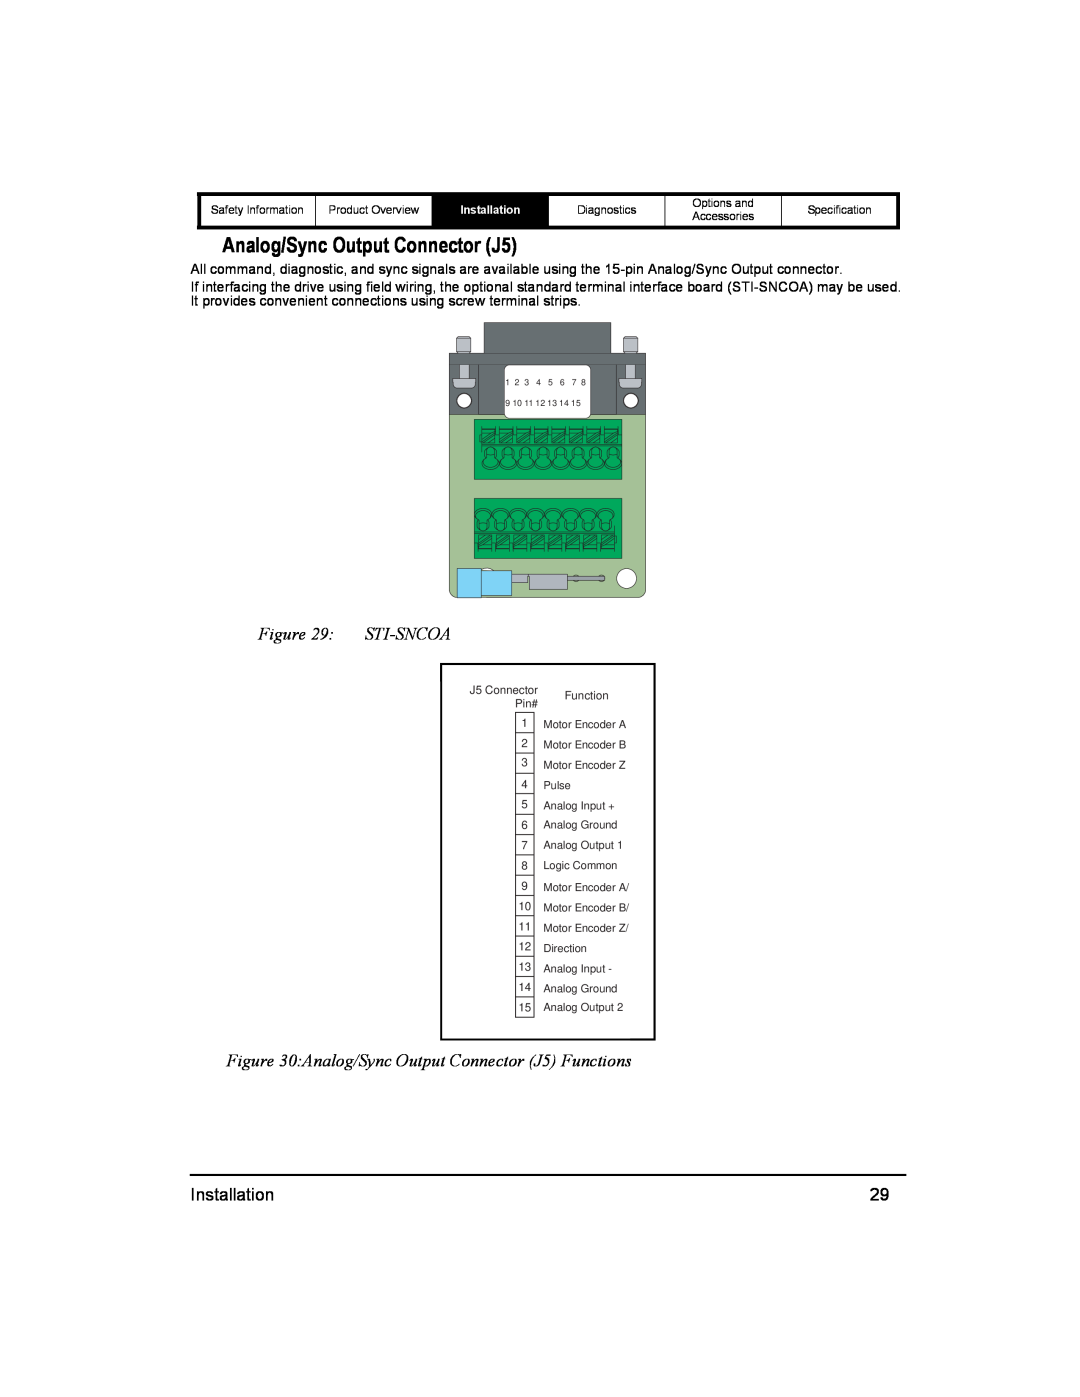 Emerson 400518-01 installation manual Sti-Sncoa, Analog/Sync Output Connector J5 Functions 